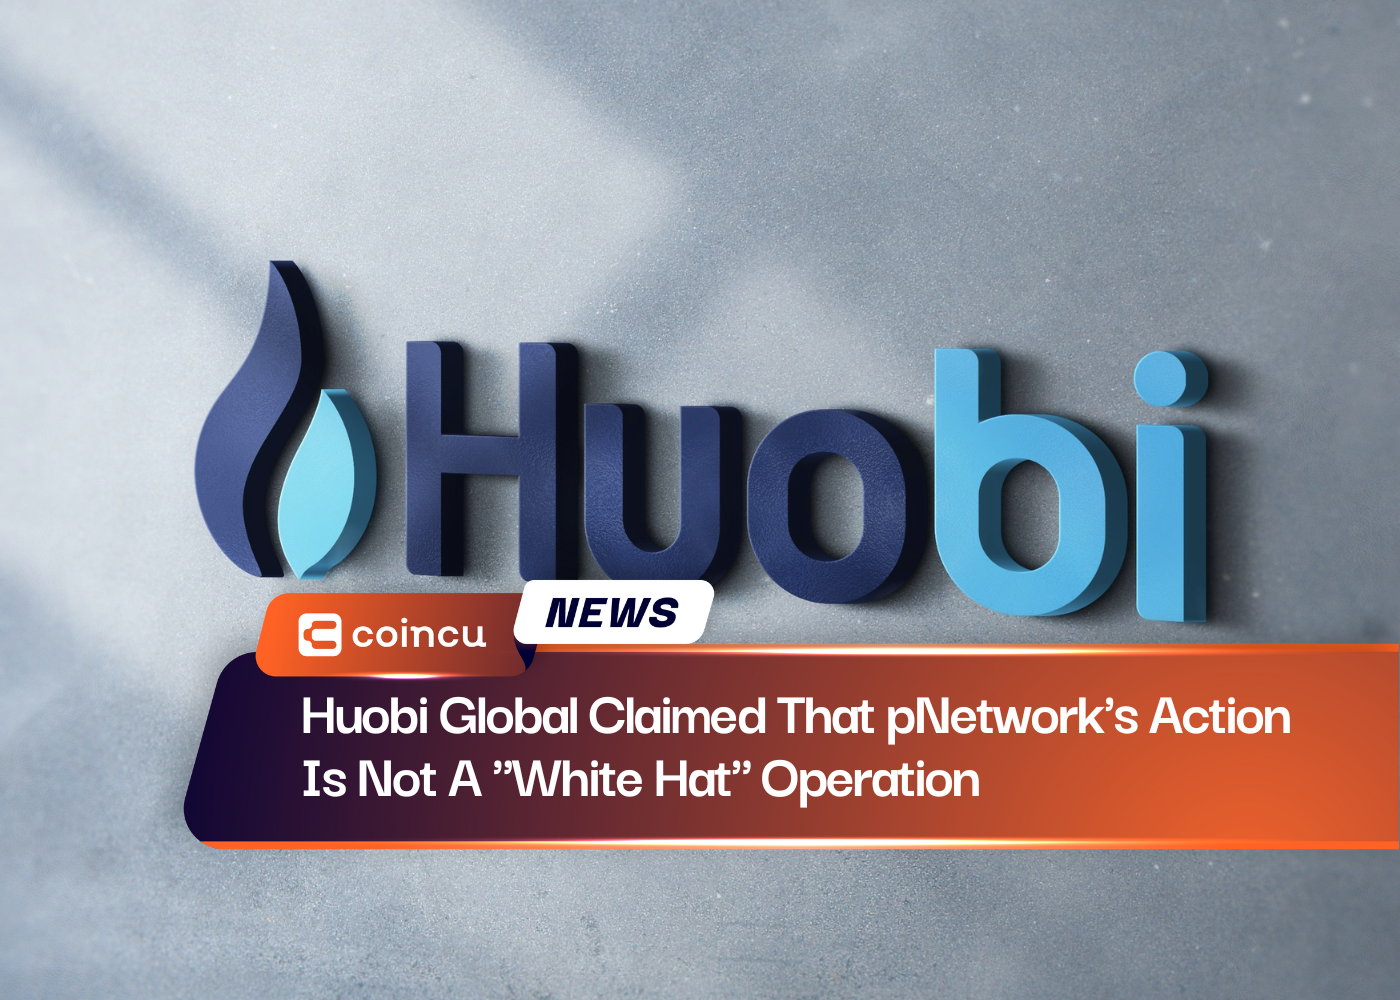 Huobi Global Claimed That pNetwork's Action Is Not A "White Hat" Operation